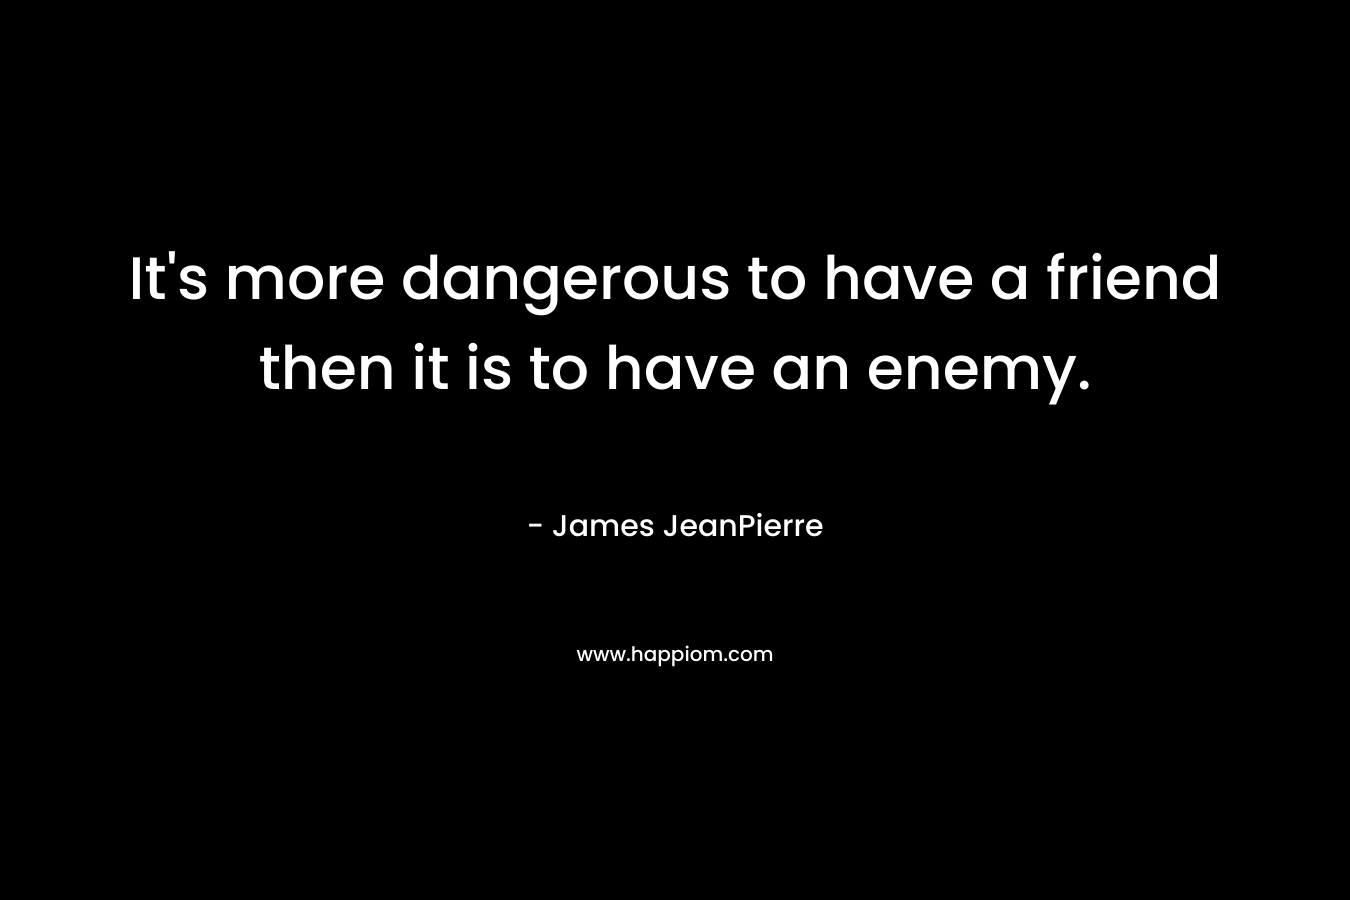 It's more dangerous to have a friend then it is to have an enemy.